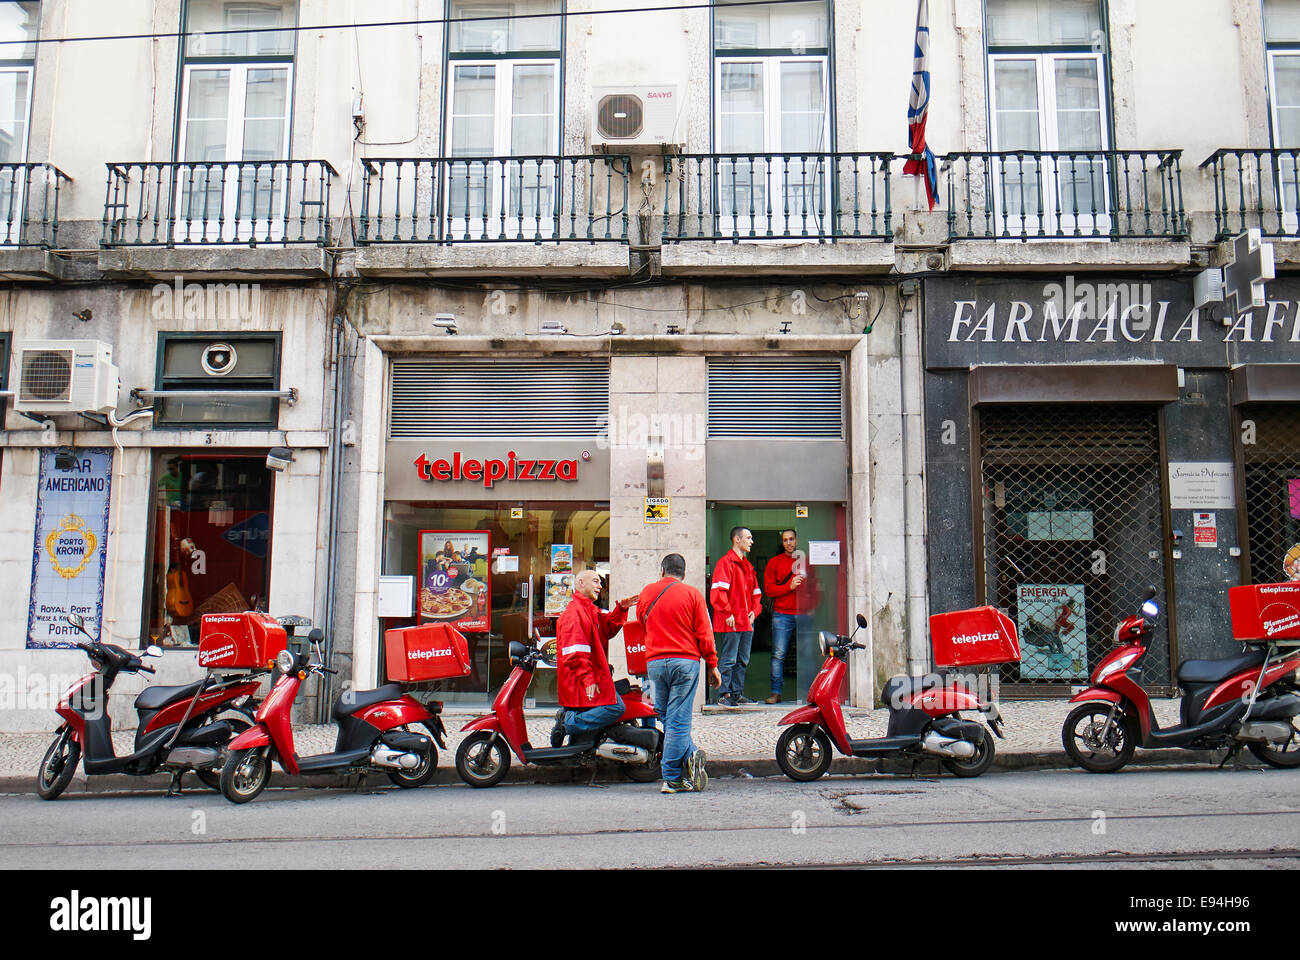 Telepizza pizza service with red scooters in Pombaline Lower Town Baixa Pombalina Lisbon Portugal Stock Photo